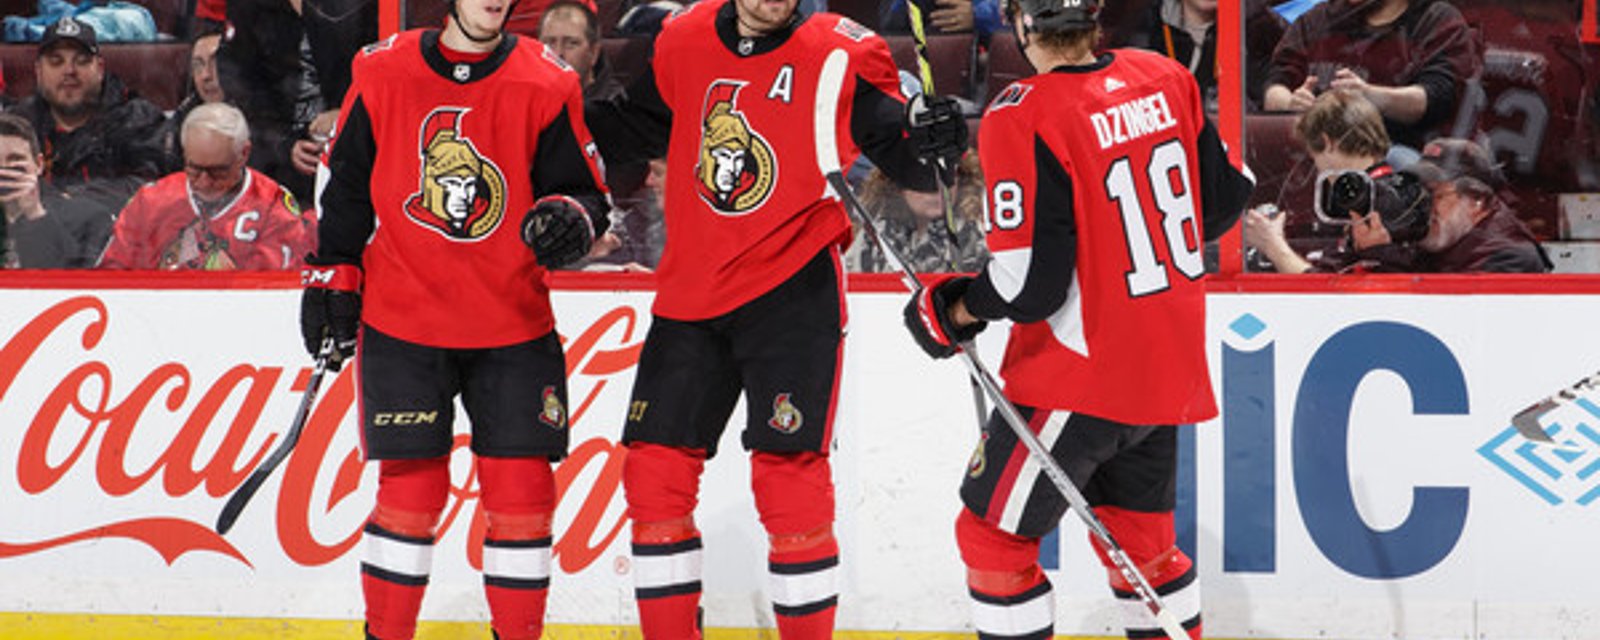 Breaking: Sens forward missing from practice as imminent trade could take place! 